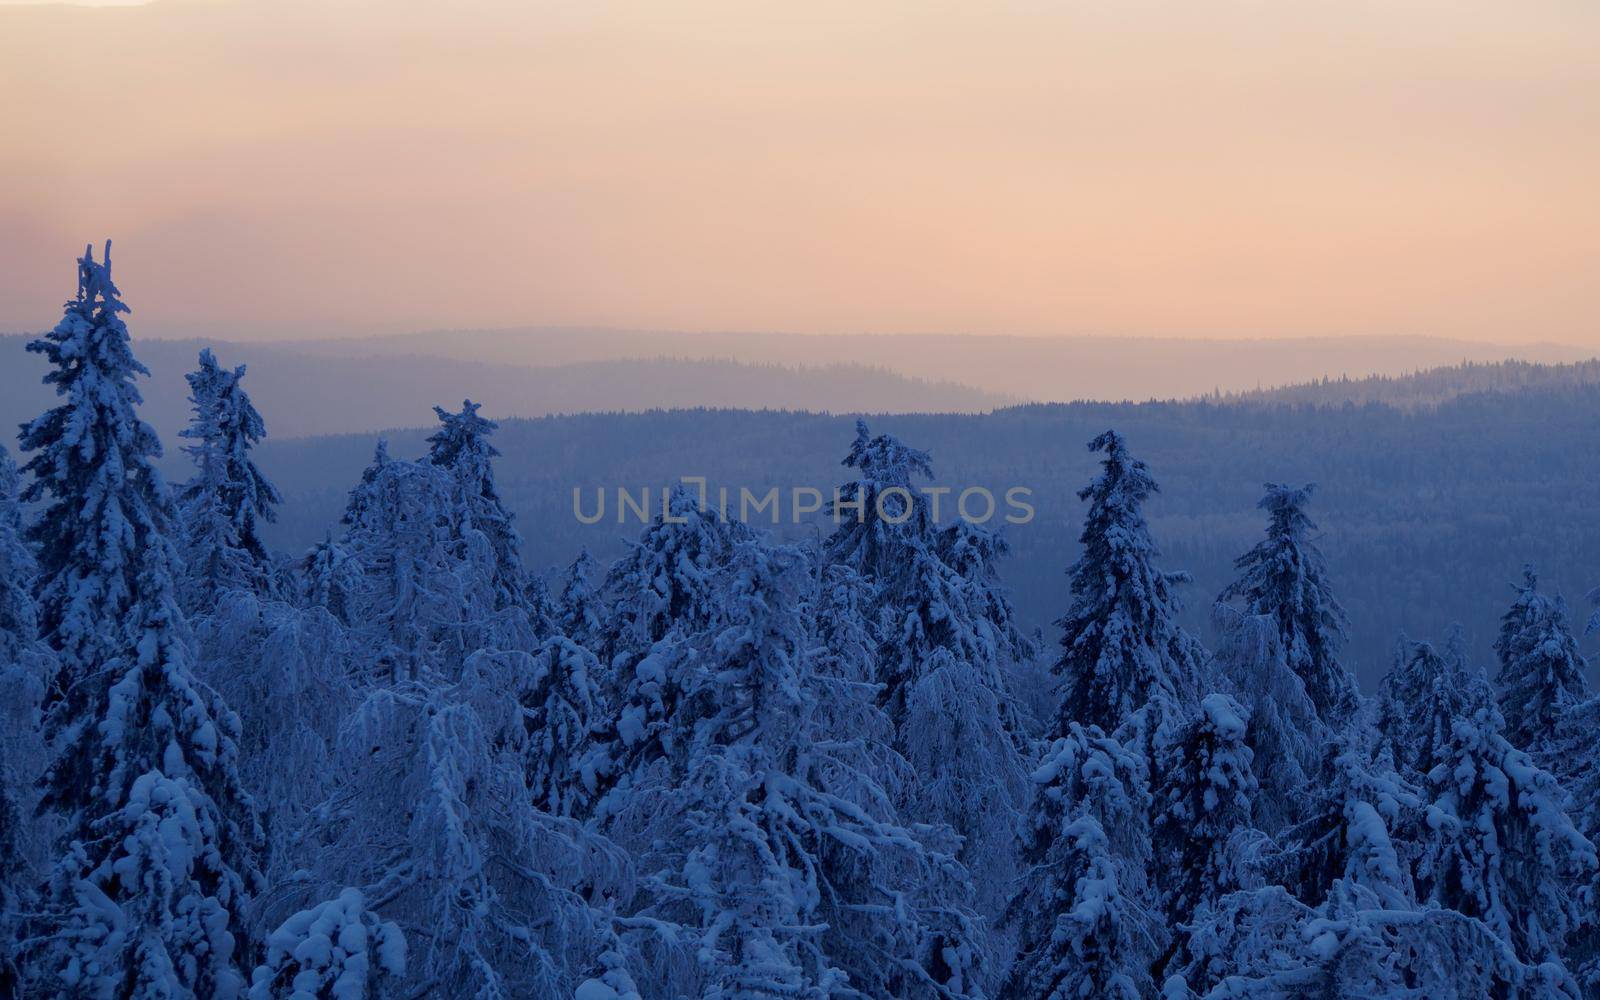 Snow-covered trees in winter at sunset in the foothills of the Ural mountains